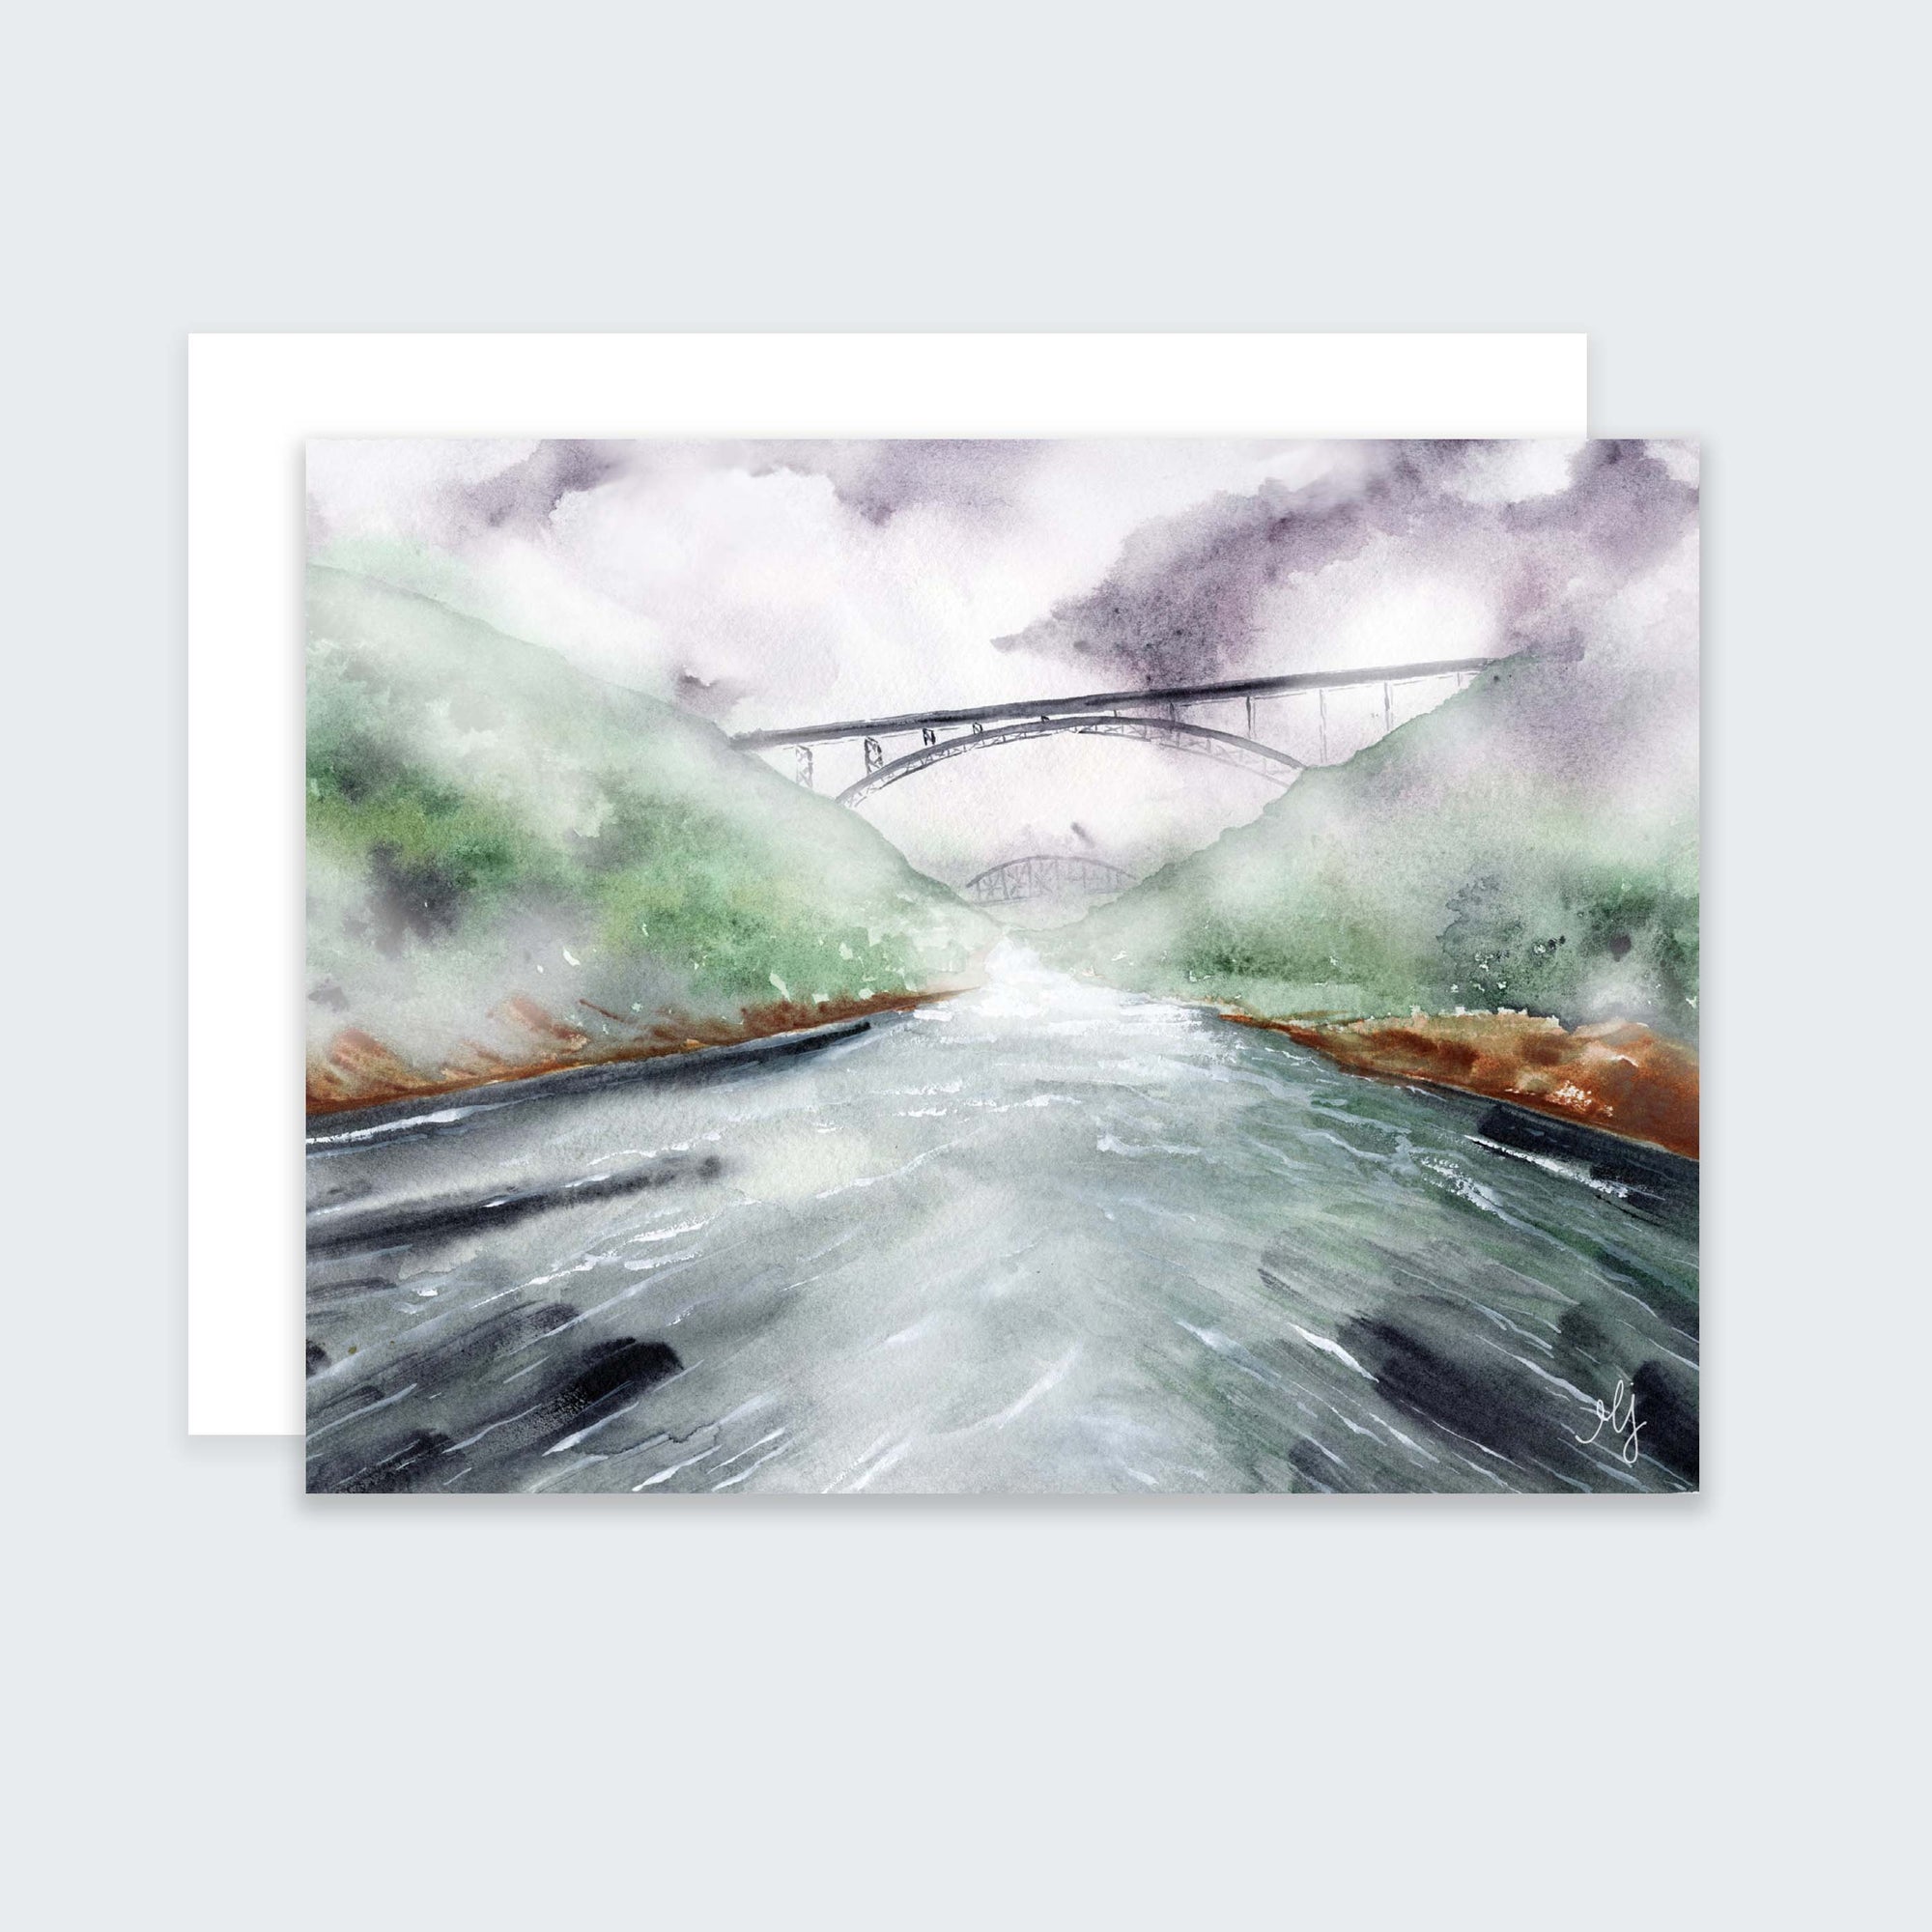 Misty New River Gorge National Park Boxed Set of 8 | Greeting Cards